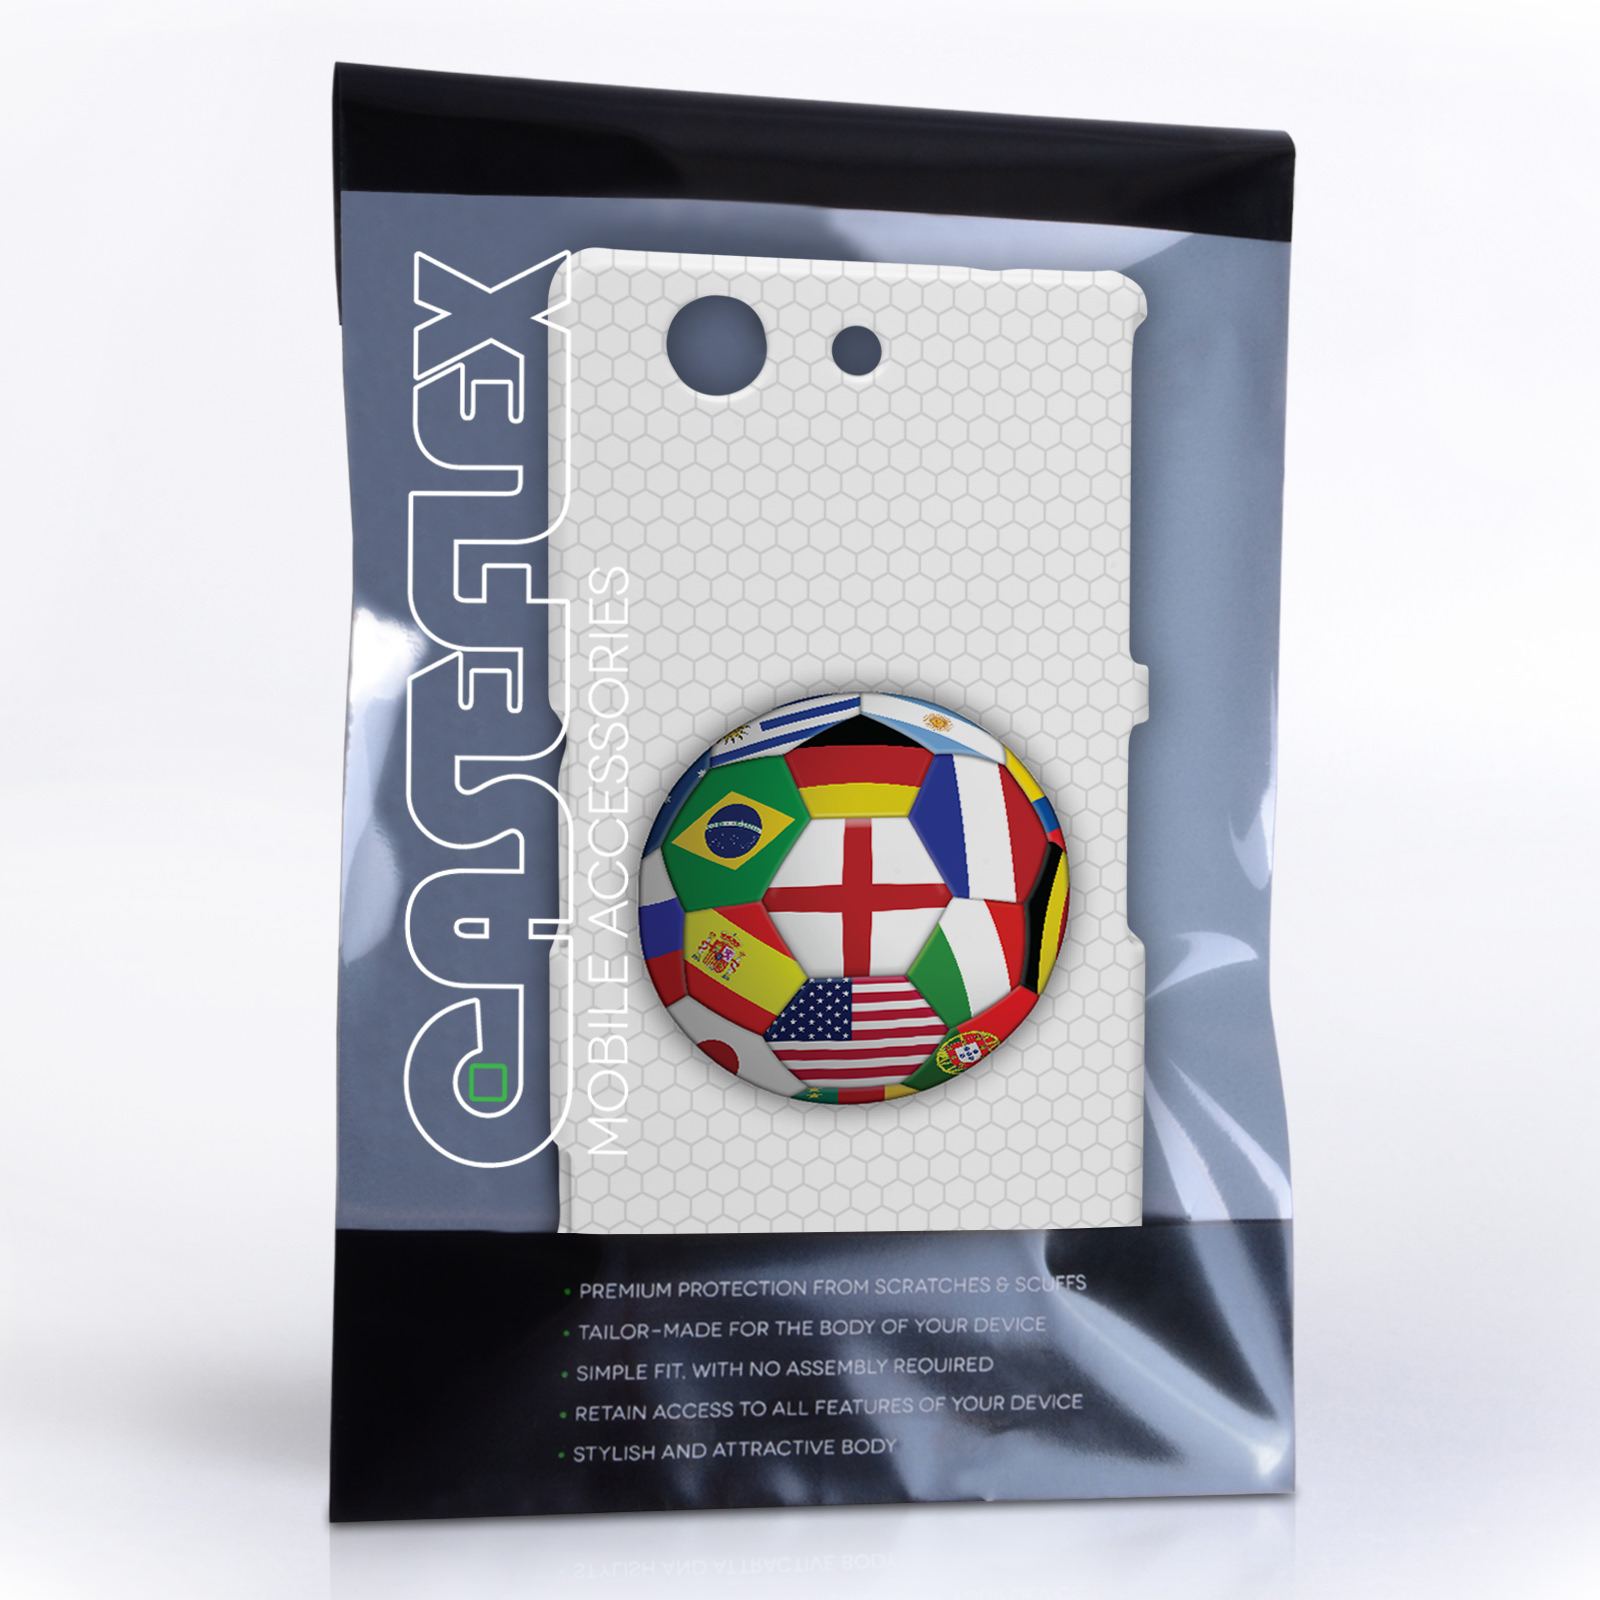 Caseflex Sony Xperia Z3 Compact Flags World Cup Case